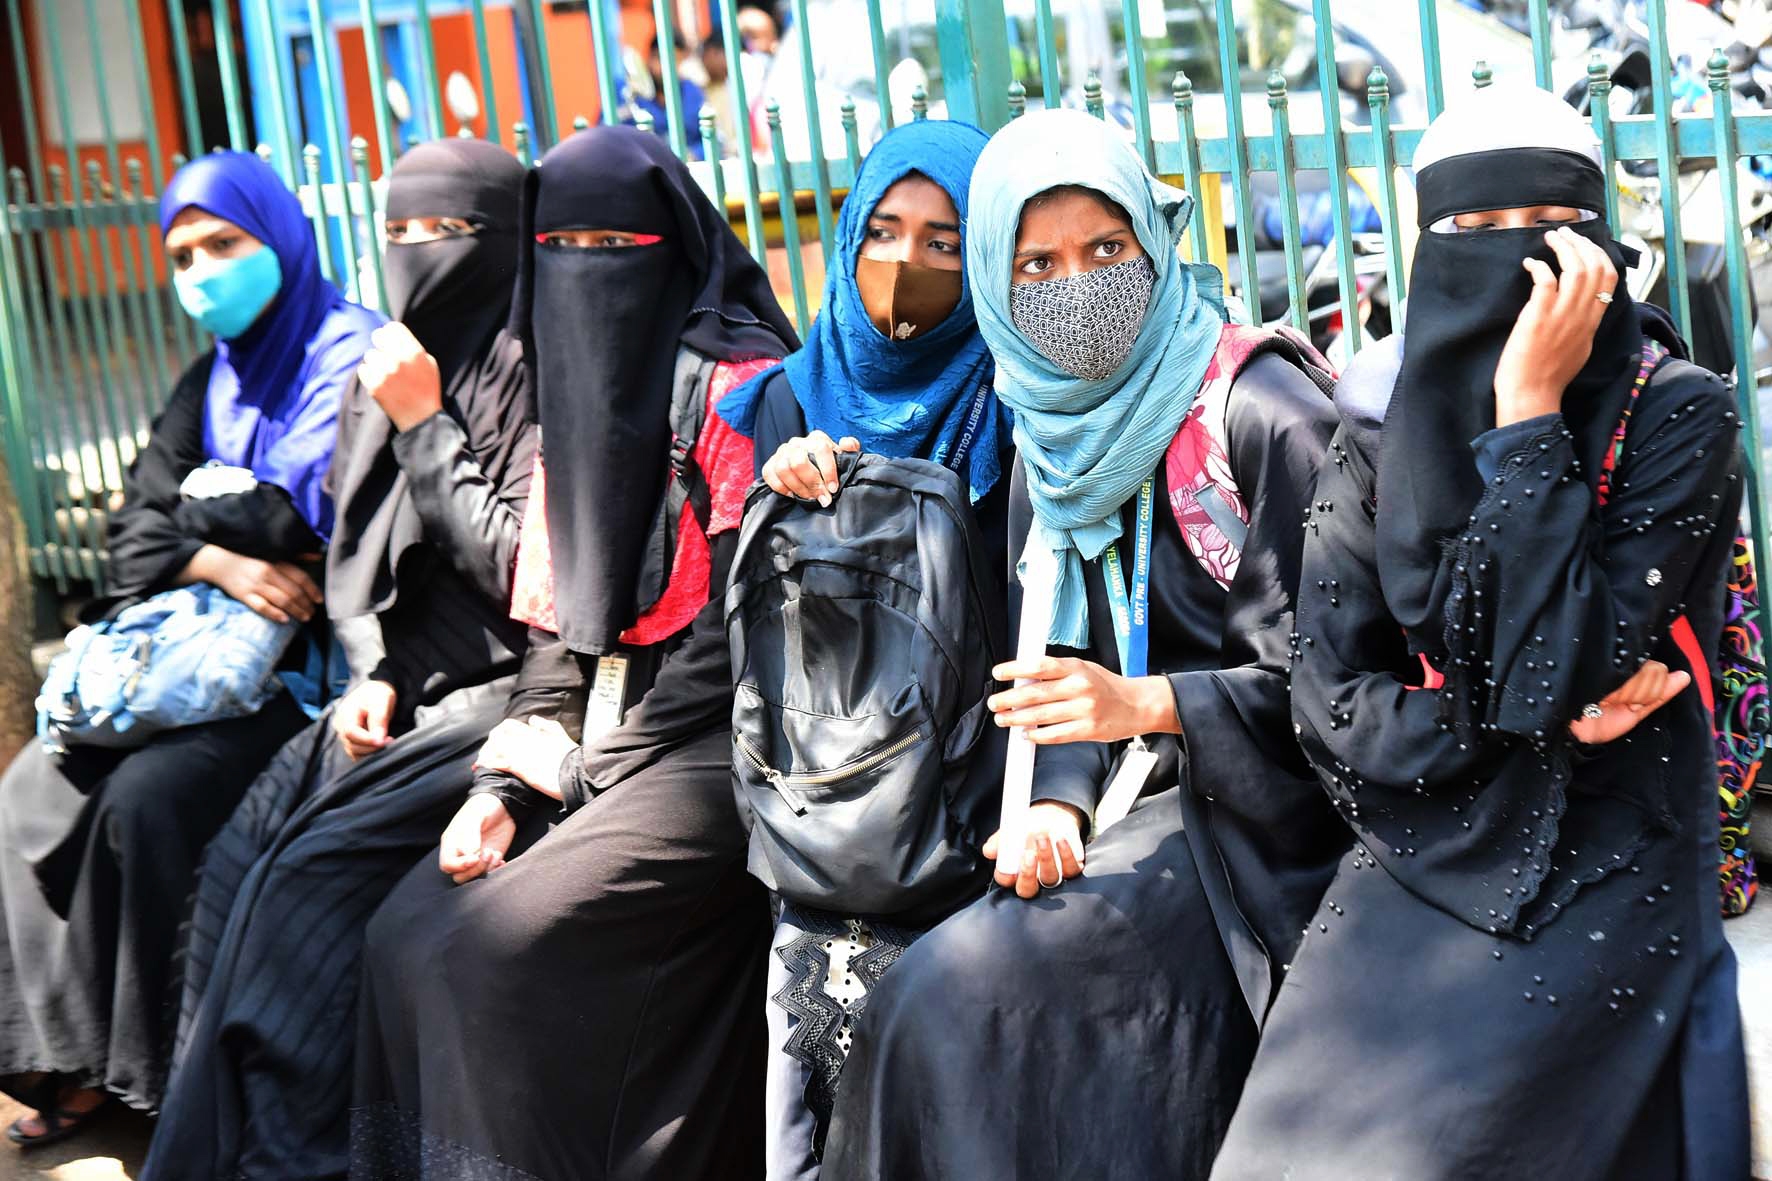 Students in Jamshedpur not allowed to take exam in hijab